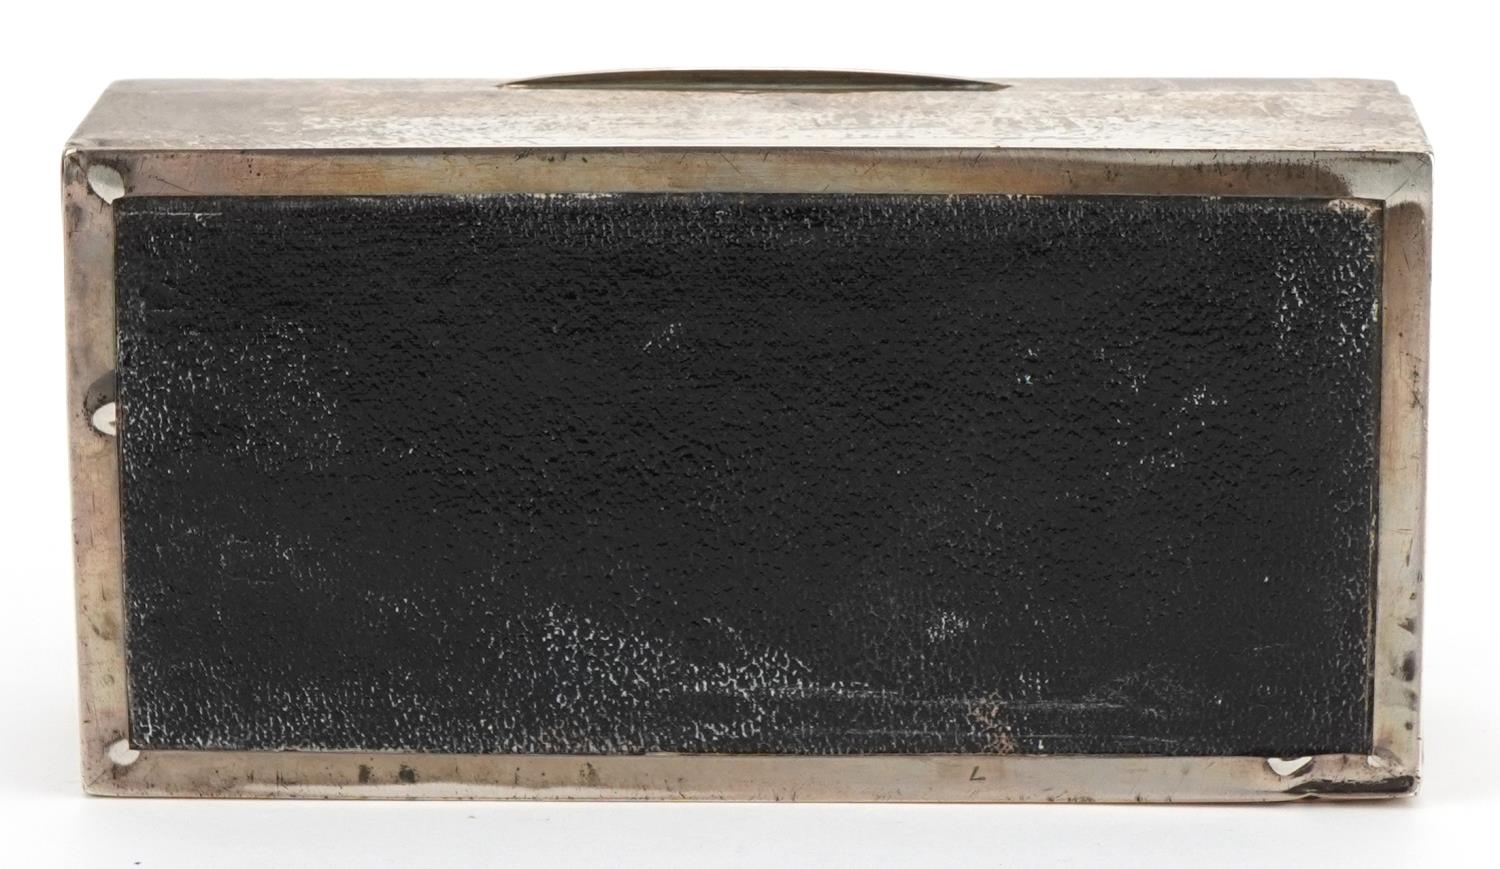 Padgett & Braham Ltd, Art Deco silver cigar box, the hinged lid with engine turned decoration, - Image 6 of 6